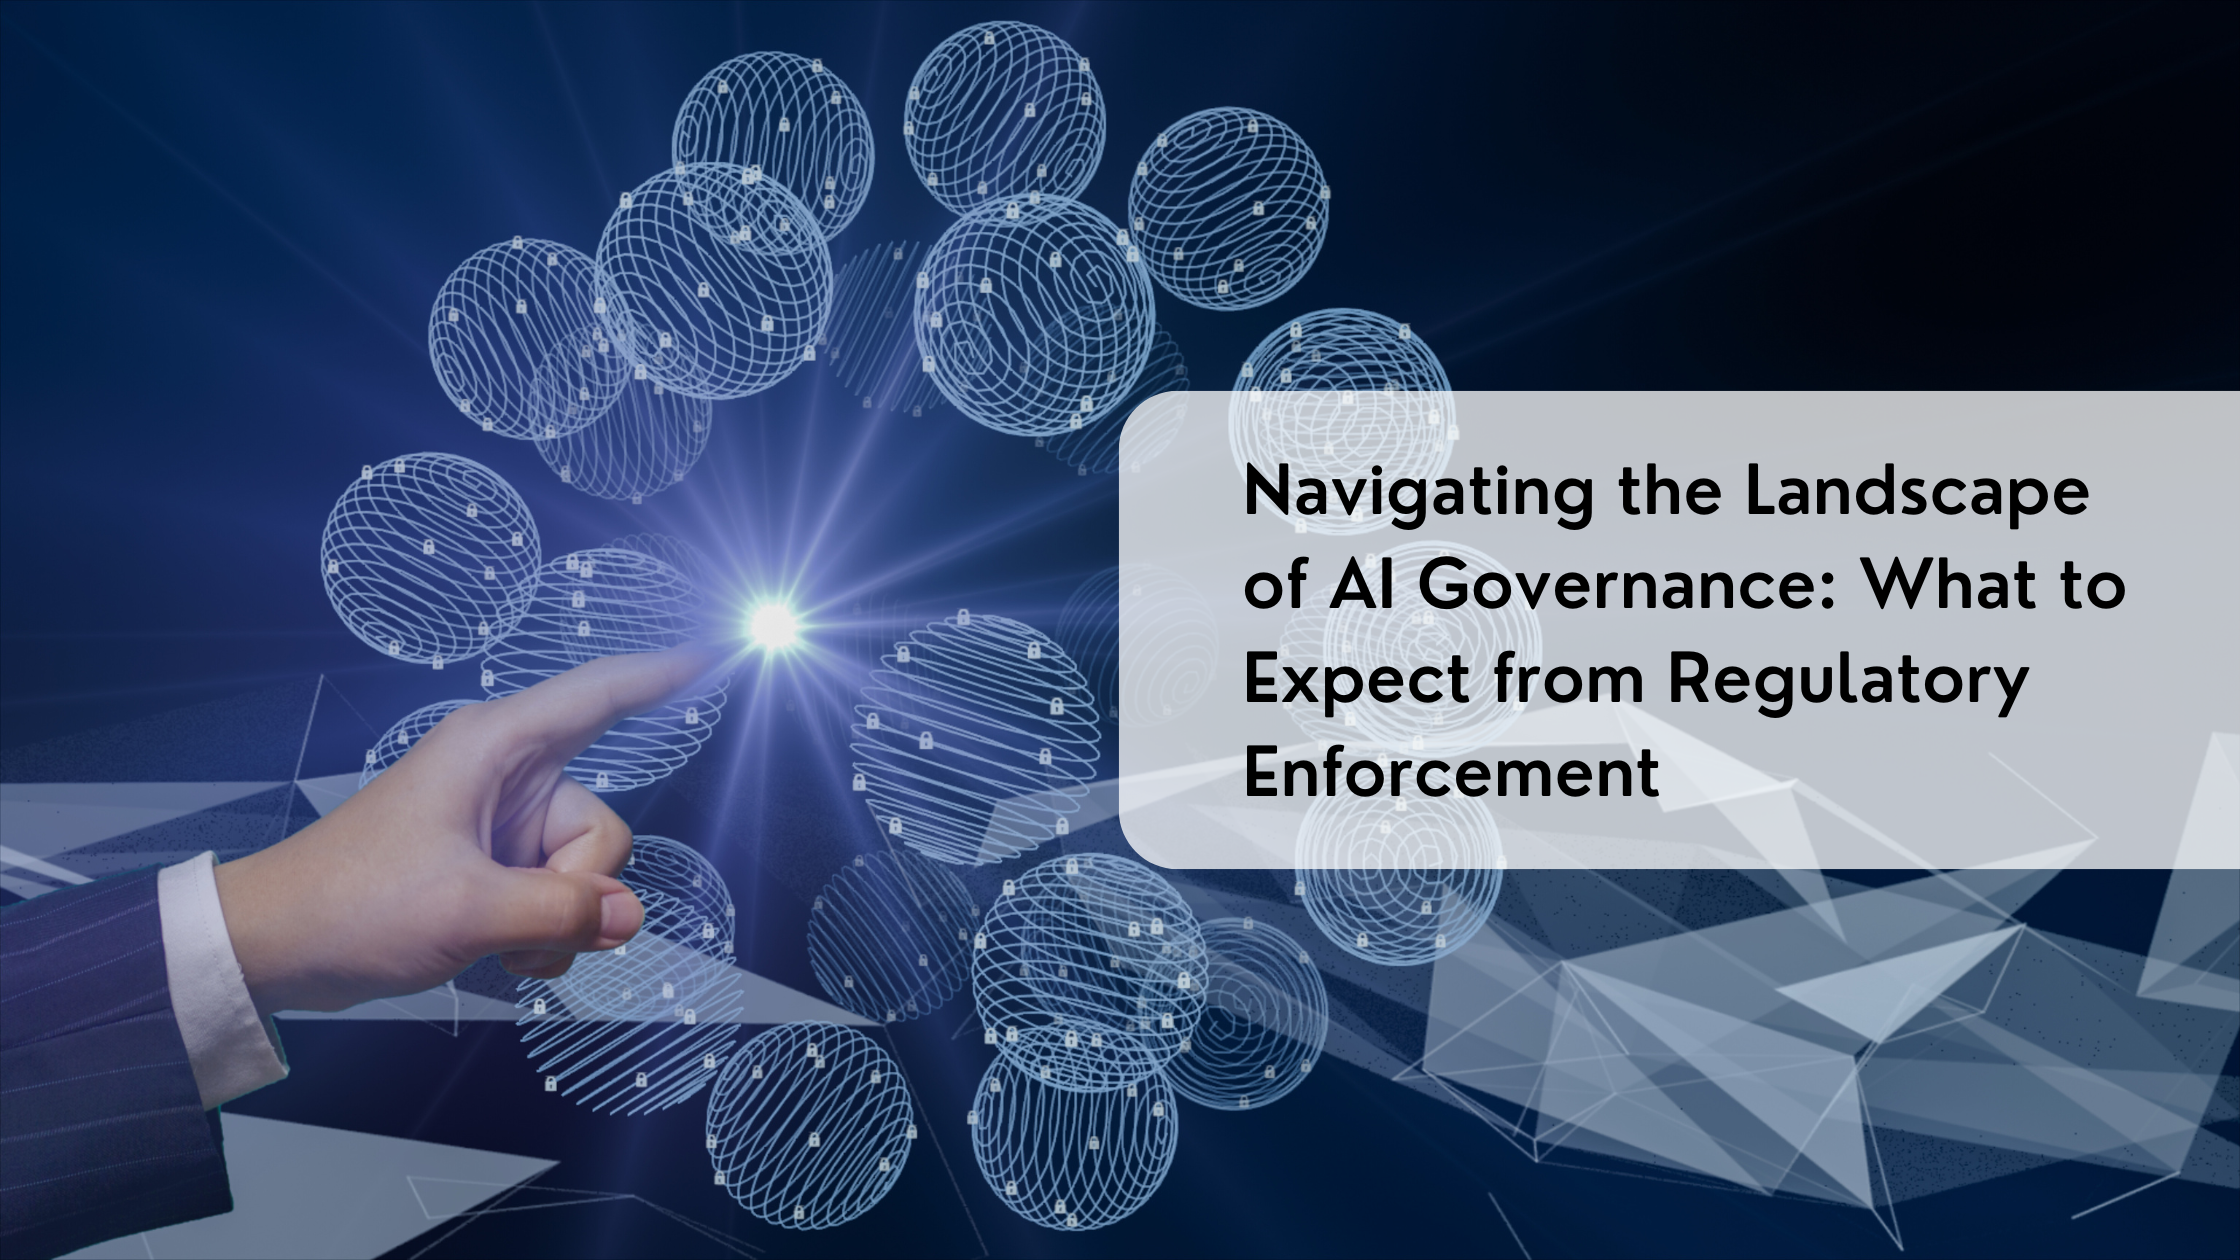 Navigating the Landscape of AI Governance: What to Expect from Regulatory Enforcement